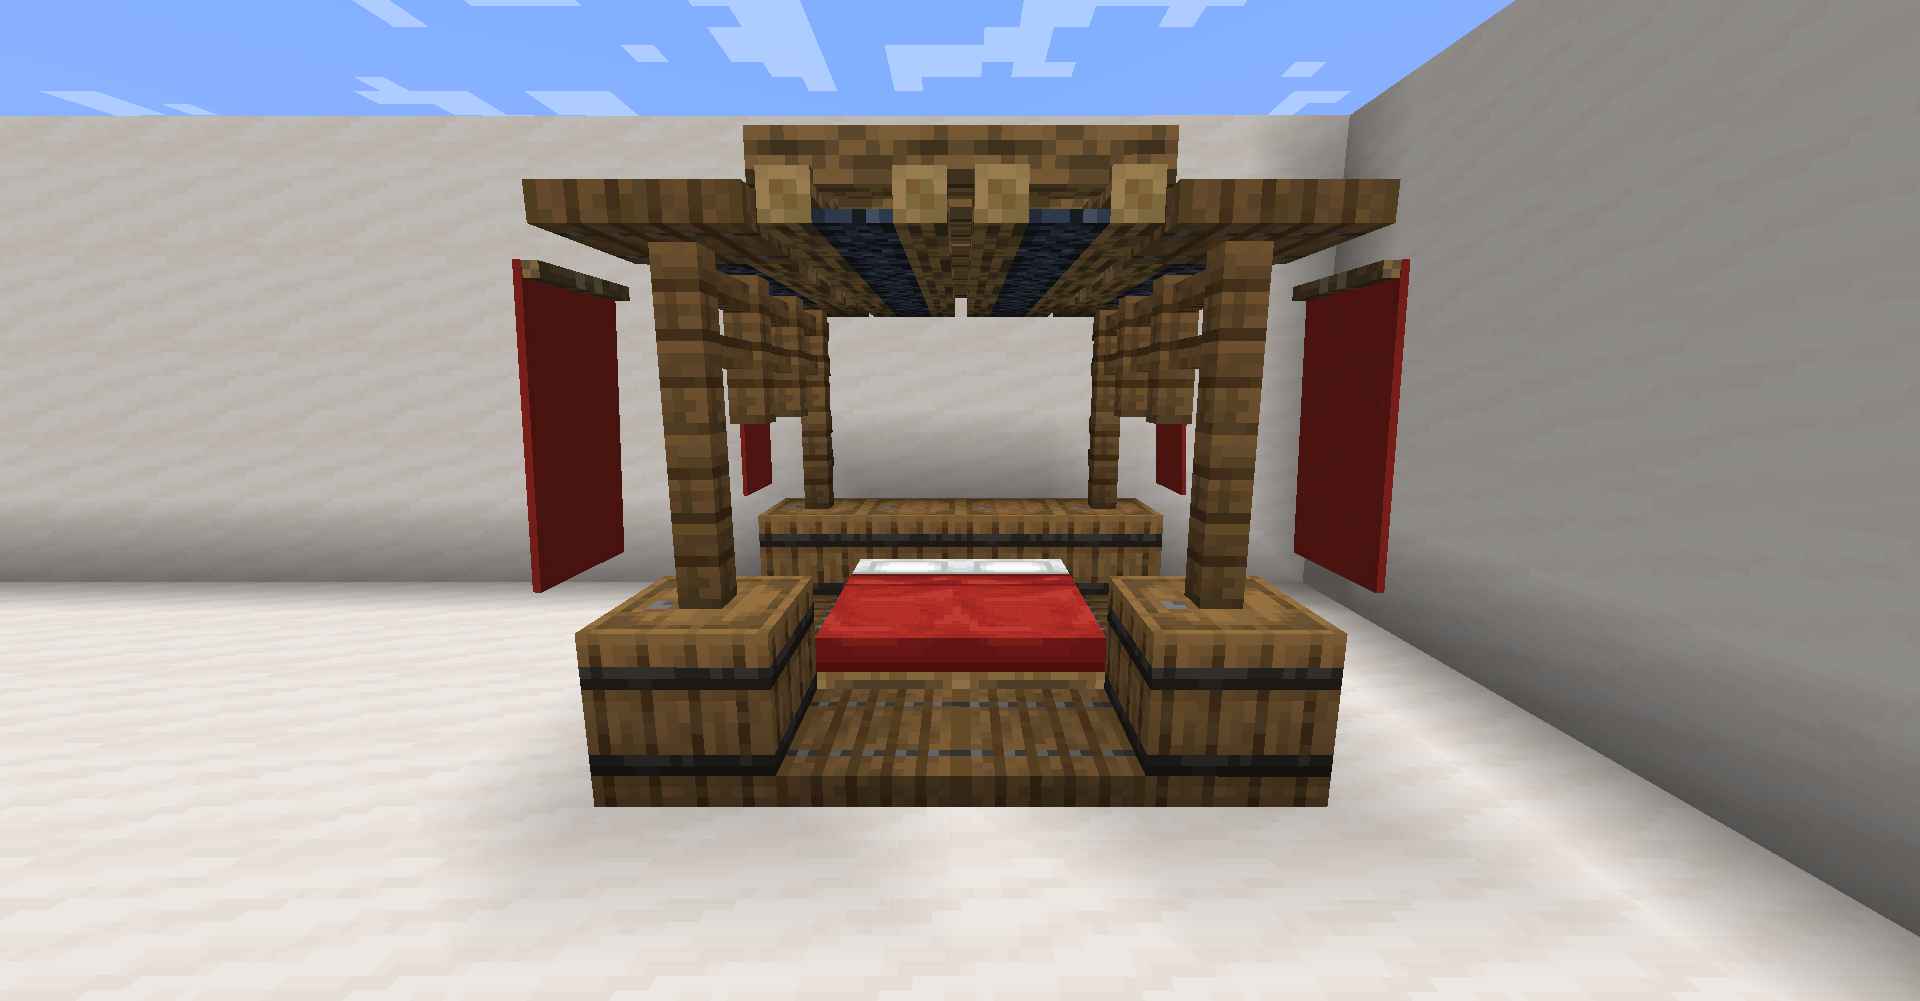 How To Make a Bed In Minecraft